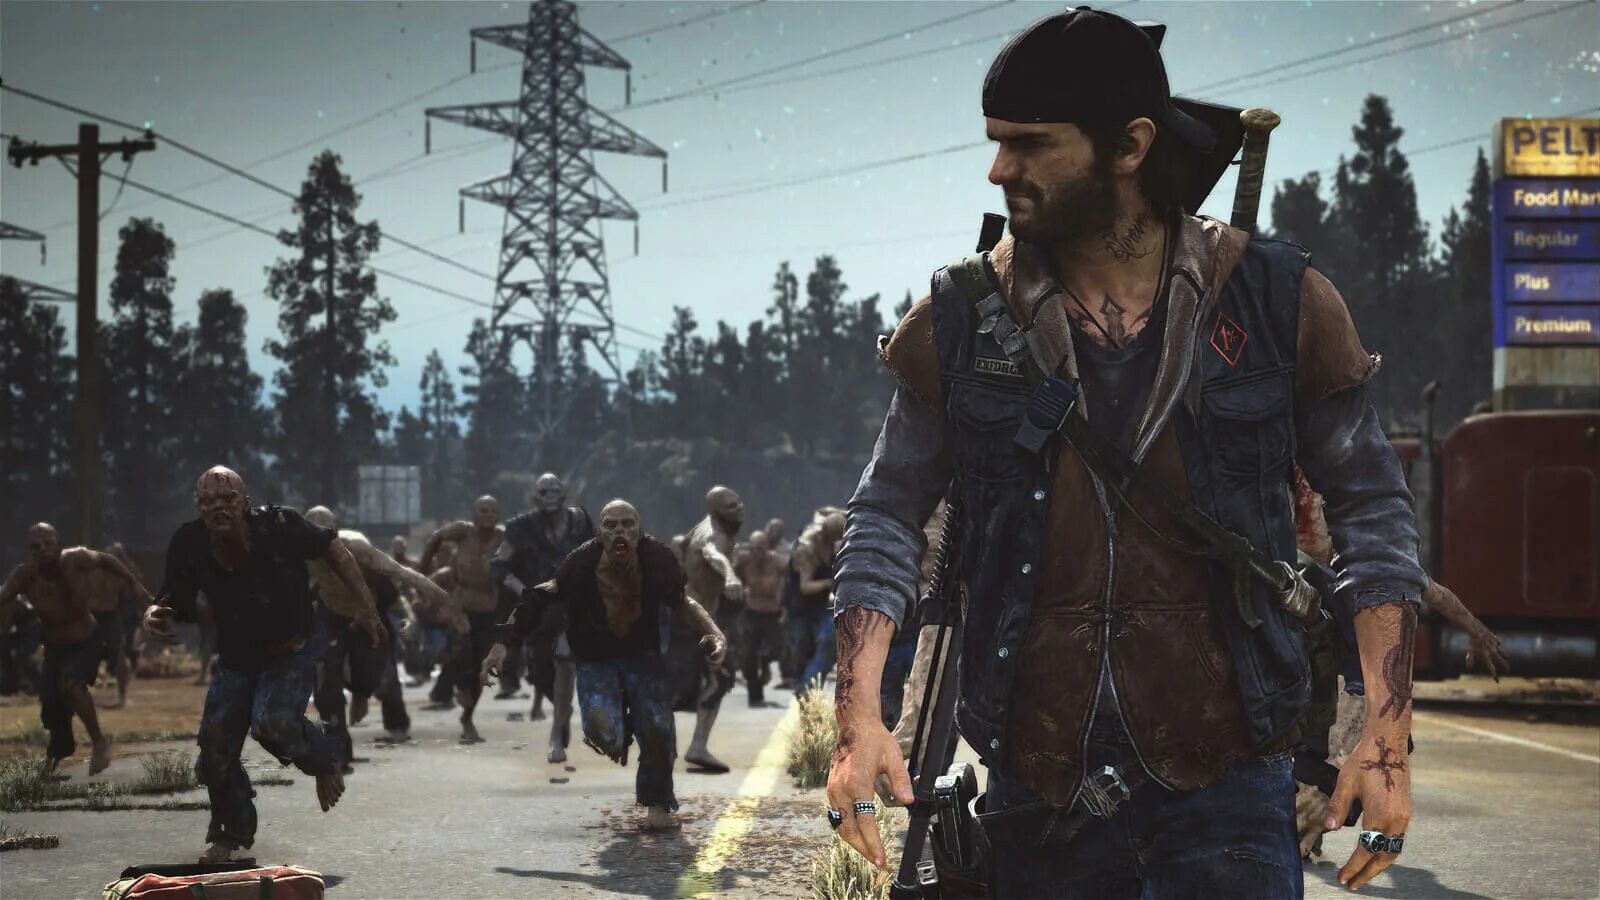 Goes like town. Дикон сент Джон Days gone. Бухарь Days gone. Дикон из игры Days gone.